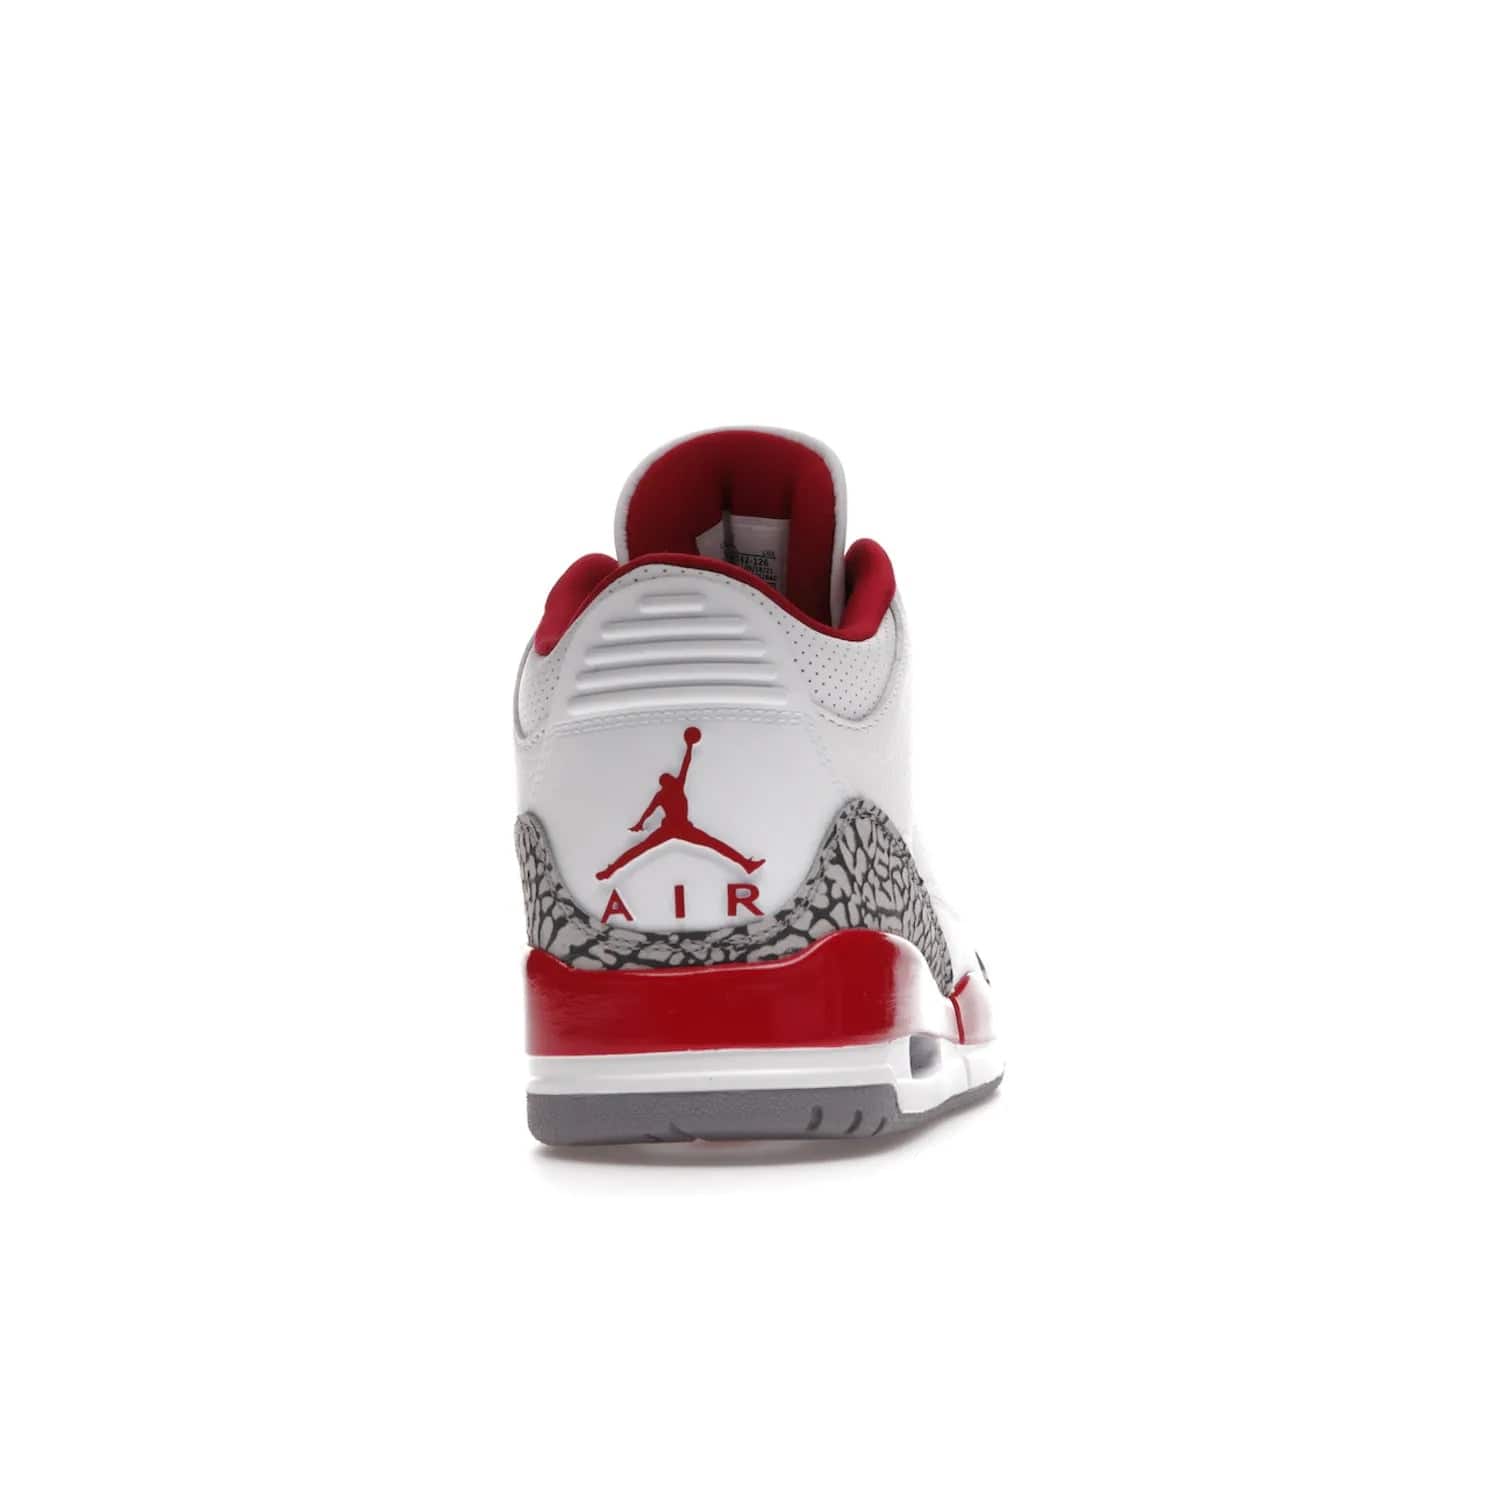 Jordan 3 Retro Cardinal Red - Image 29 - Only at www.BallersClubKickz.com - Air Jordan 3 Retro Cardinal Red combines classic style and modern appeal - white tumbled leather, signature Elephant Print overlays, cardinal red midsoles, Jumpman logo embroidery. Available Feb 2022.